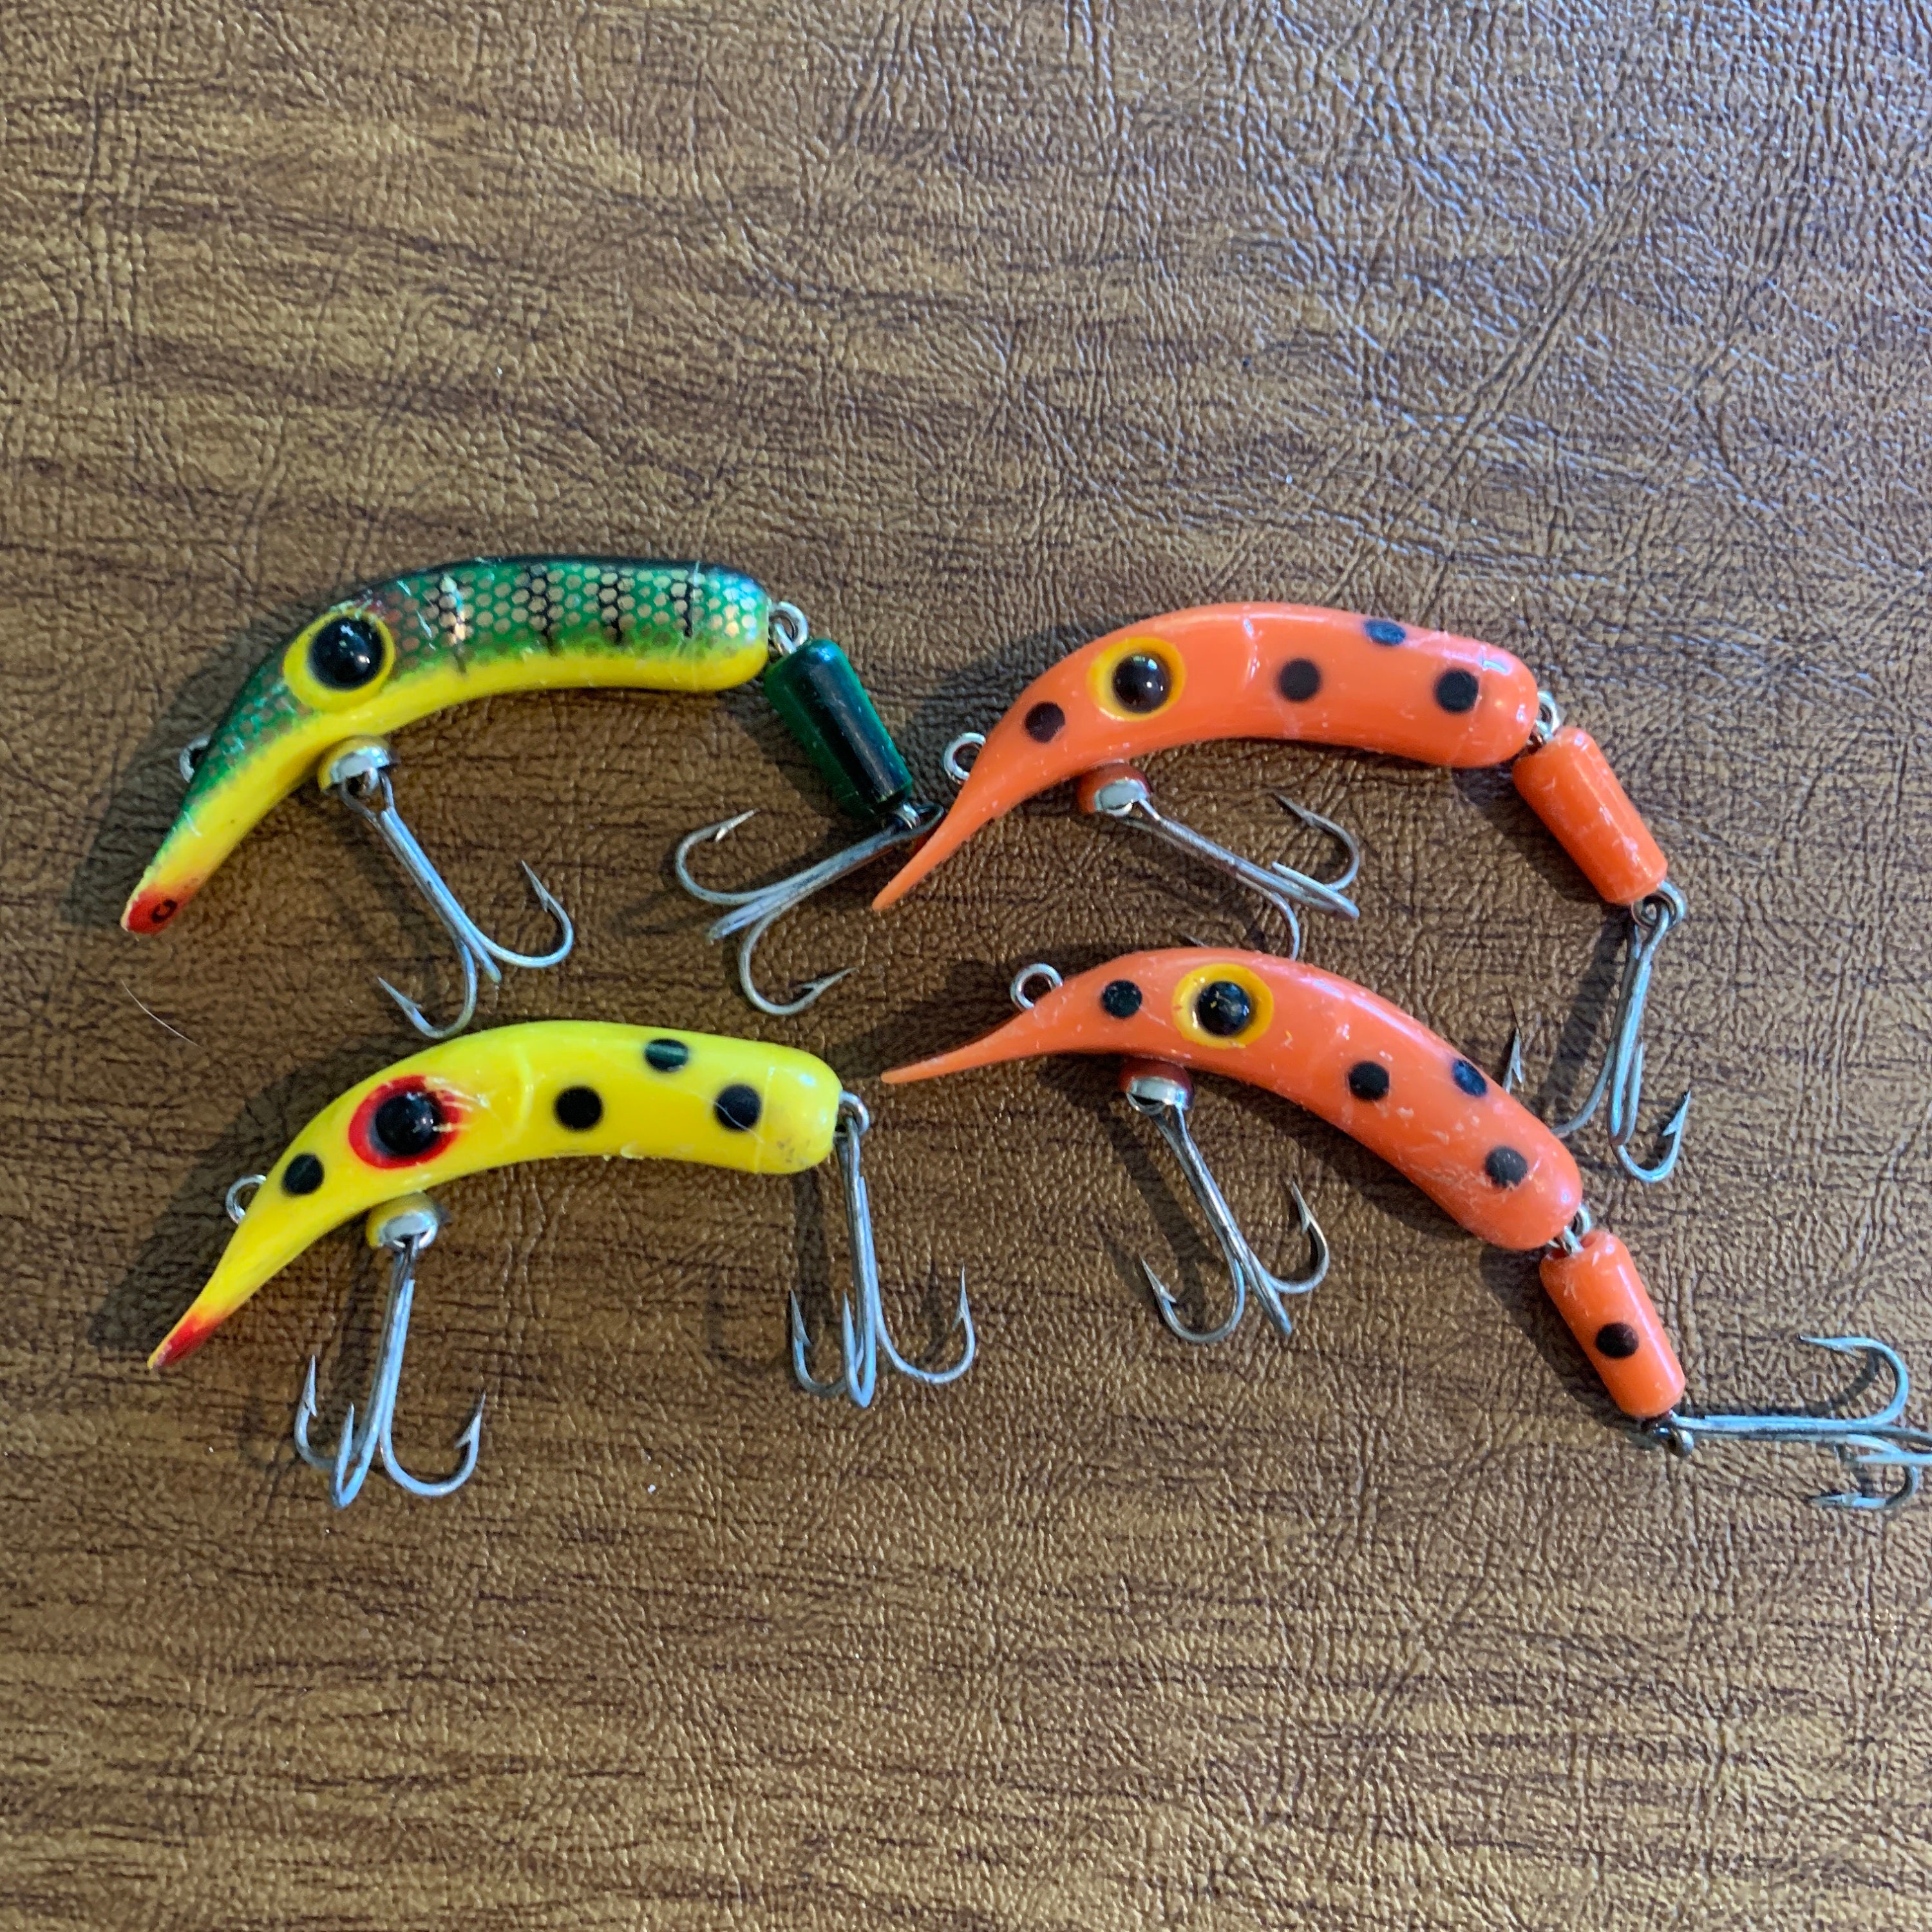 4 Beno Lures Orange Perch and Yellow Spotted Nice! Vintage